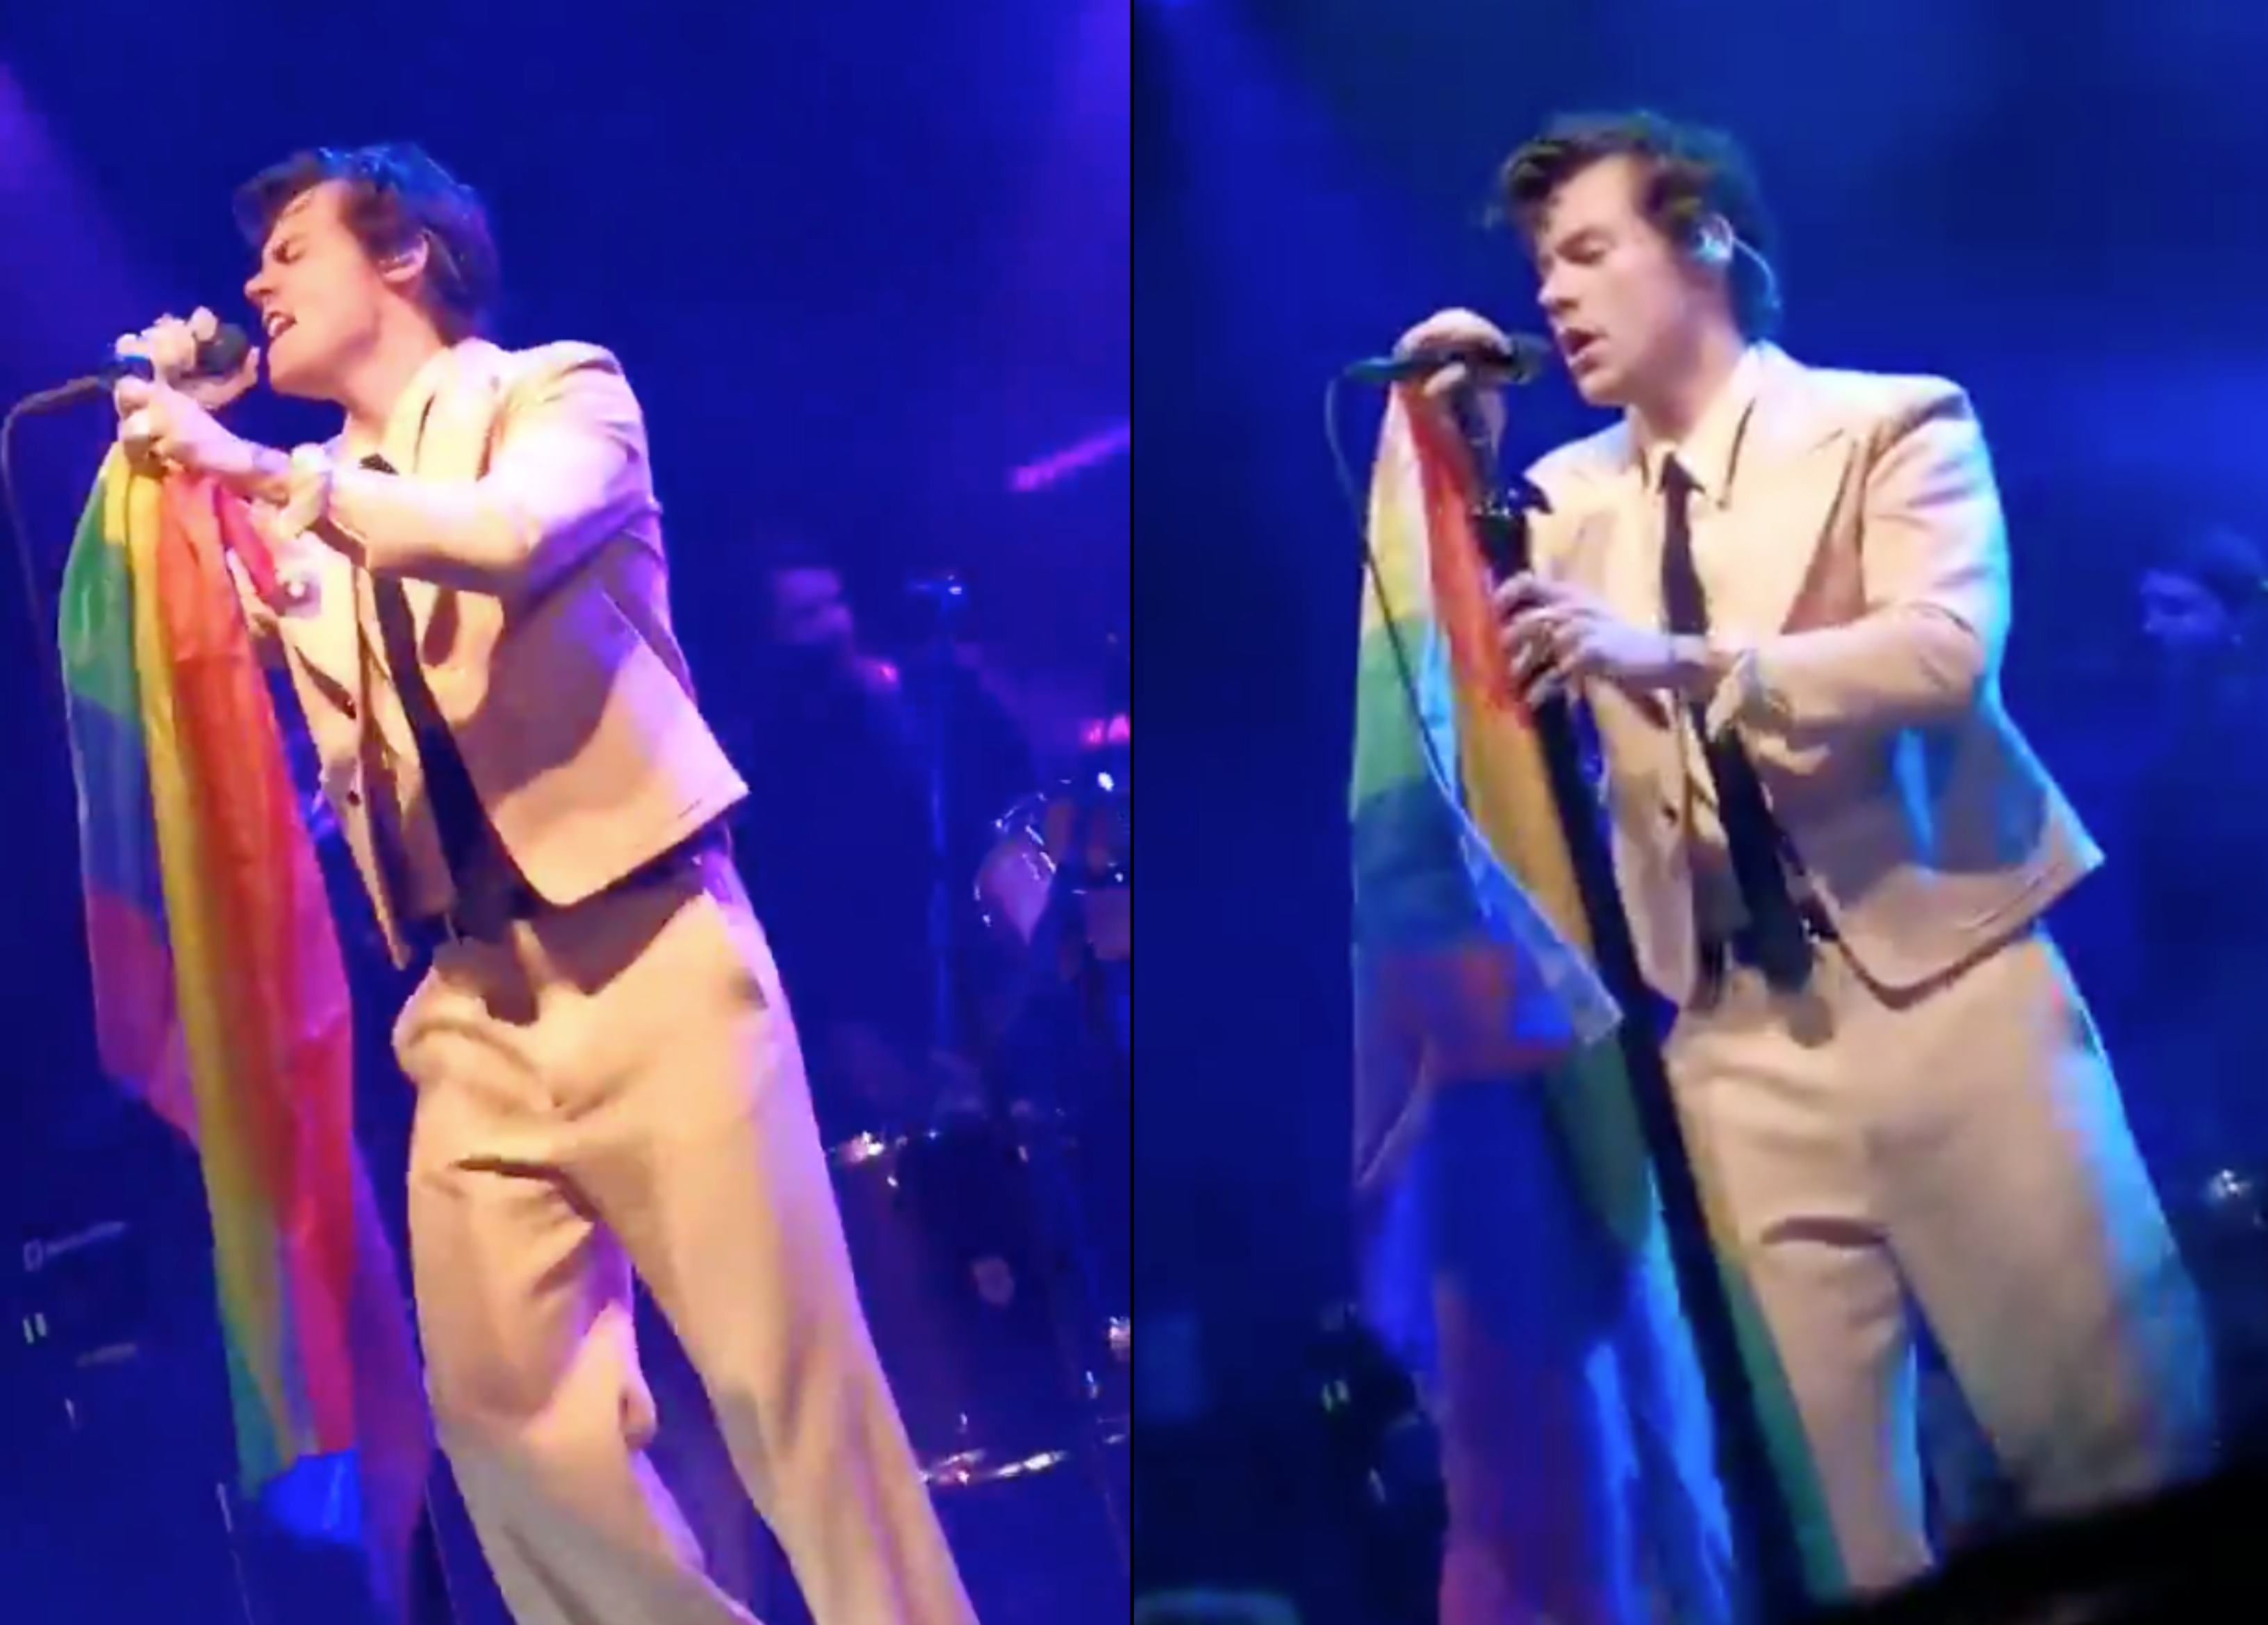 Our lord and saviour Harry Styles holding an LGBT+ Pride flag. We need this injected into our veins right now. (Screen captures via Twitter)